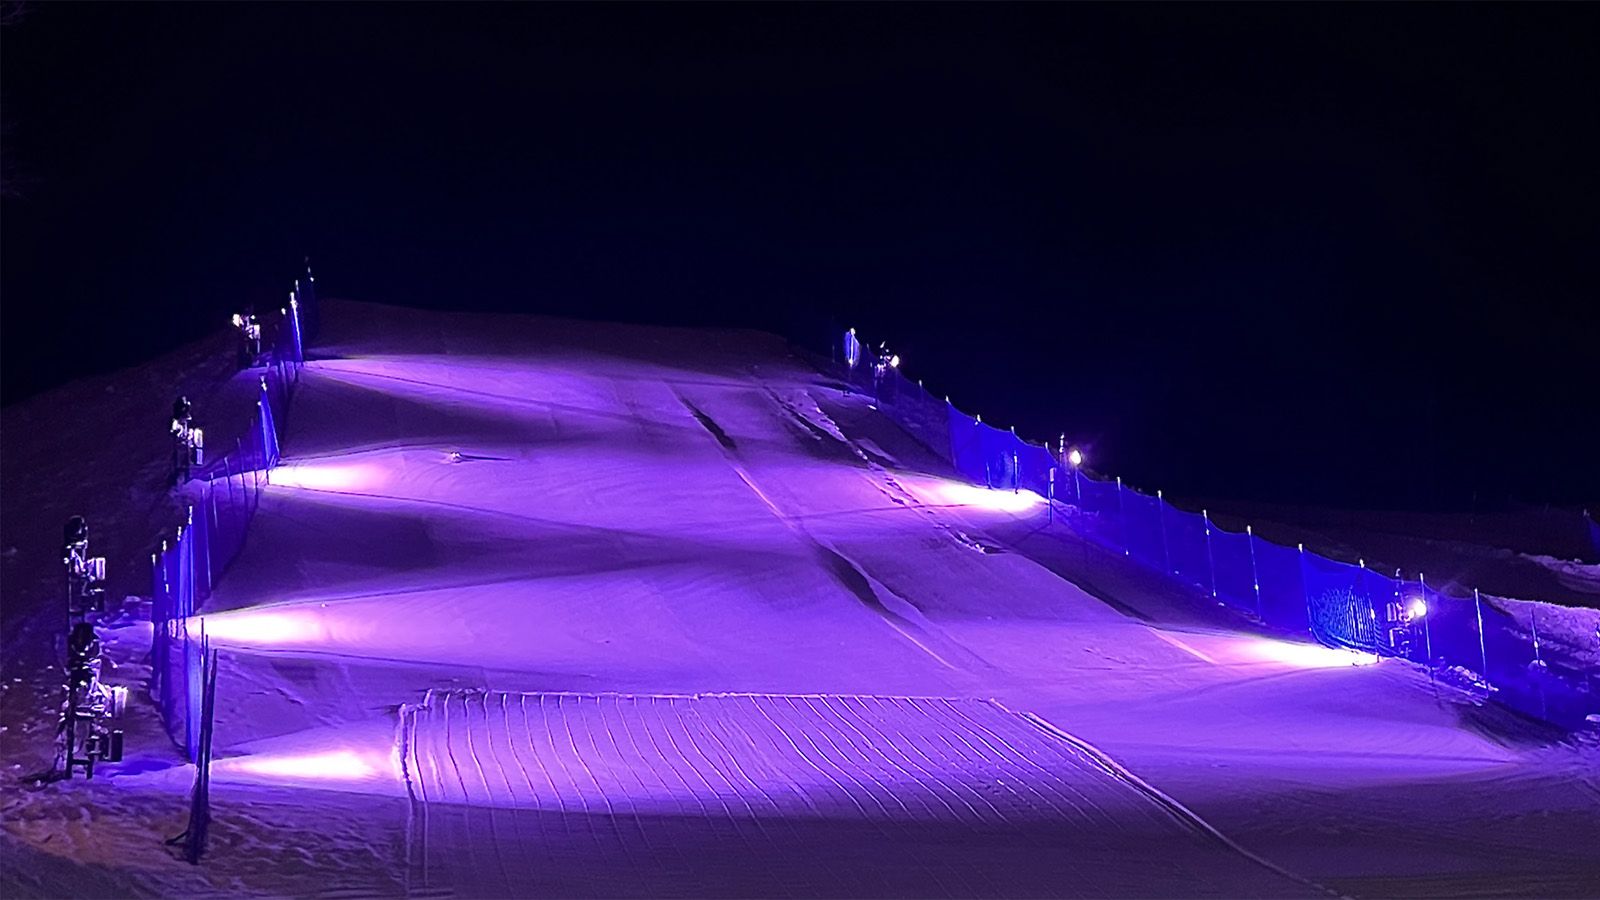 GLP JDC1 hybrids track skiing/snowboarding tricks on the slopes of Canada’s Big Air Show